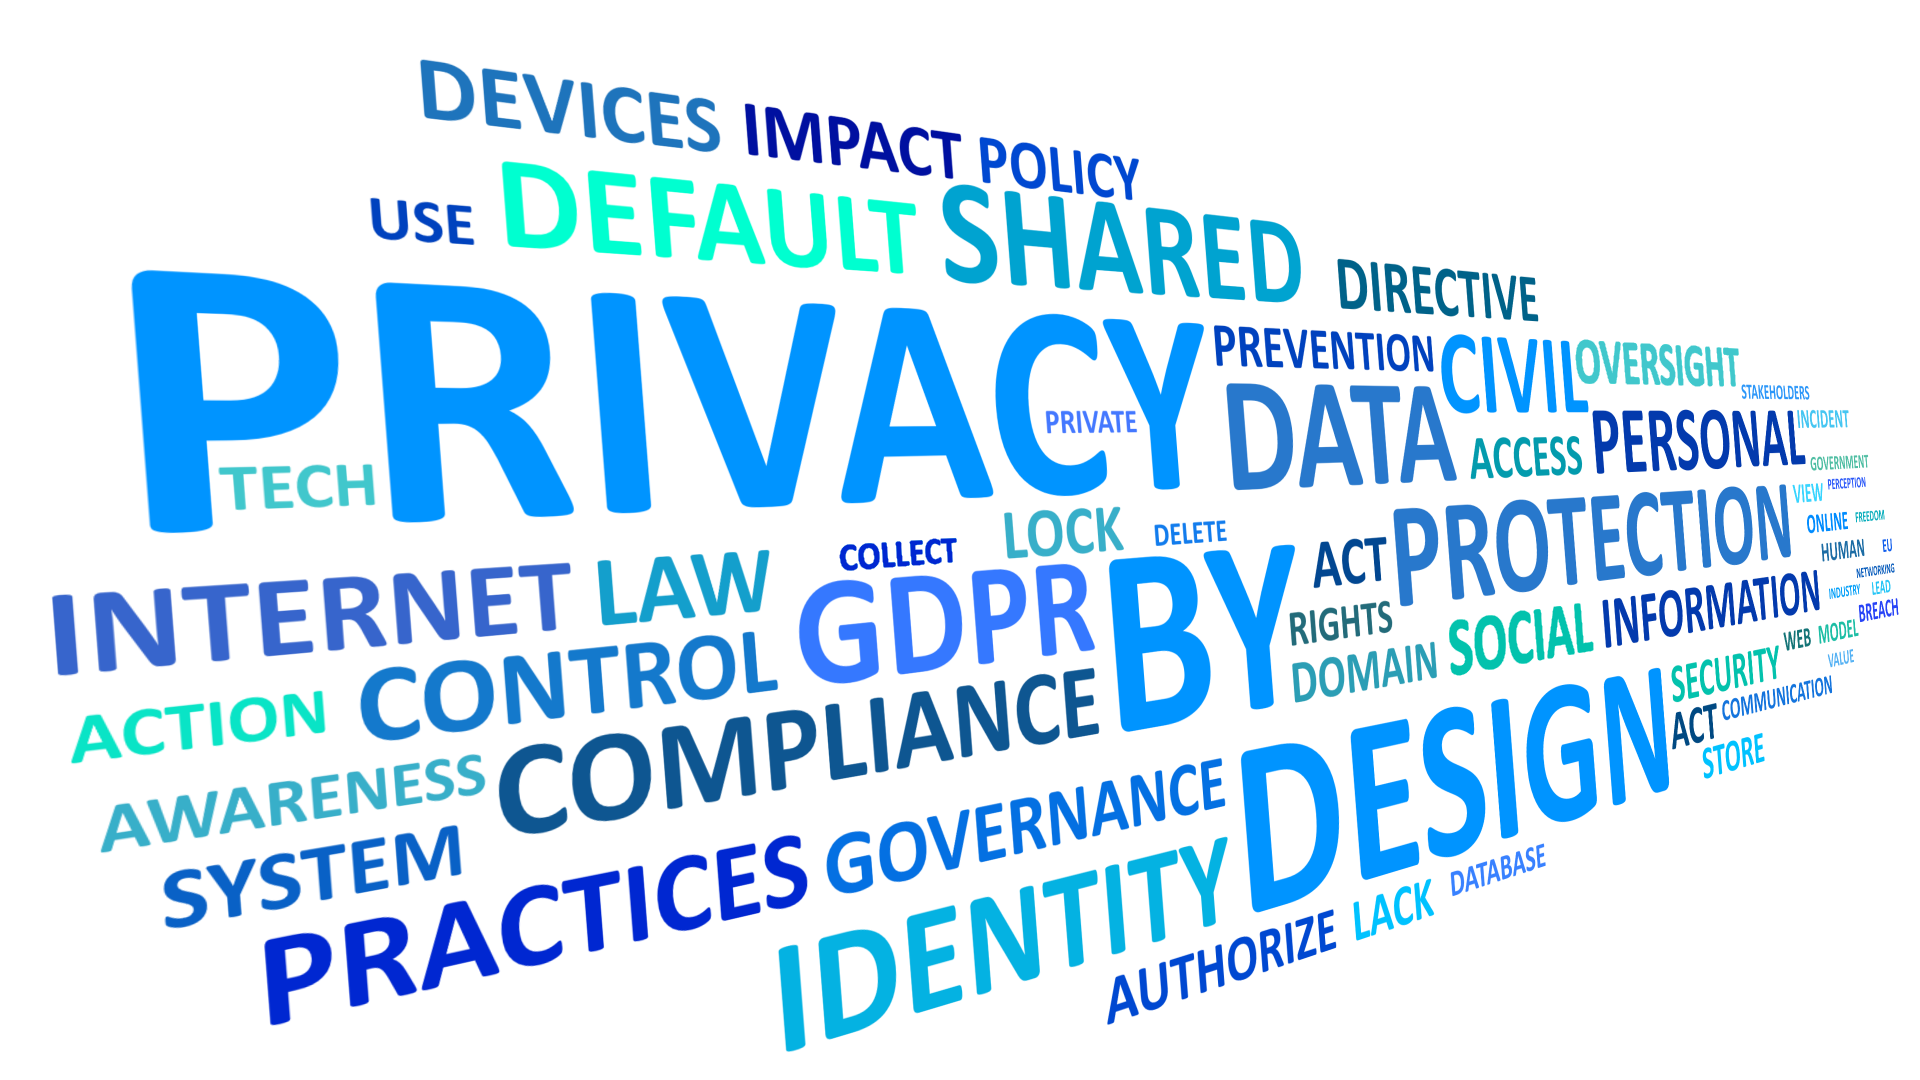 Main image on the home page consisting of bundled privacy related terms as words